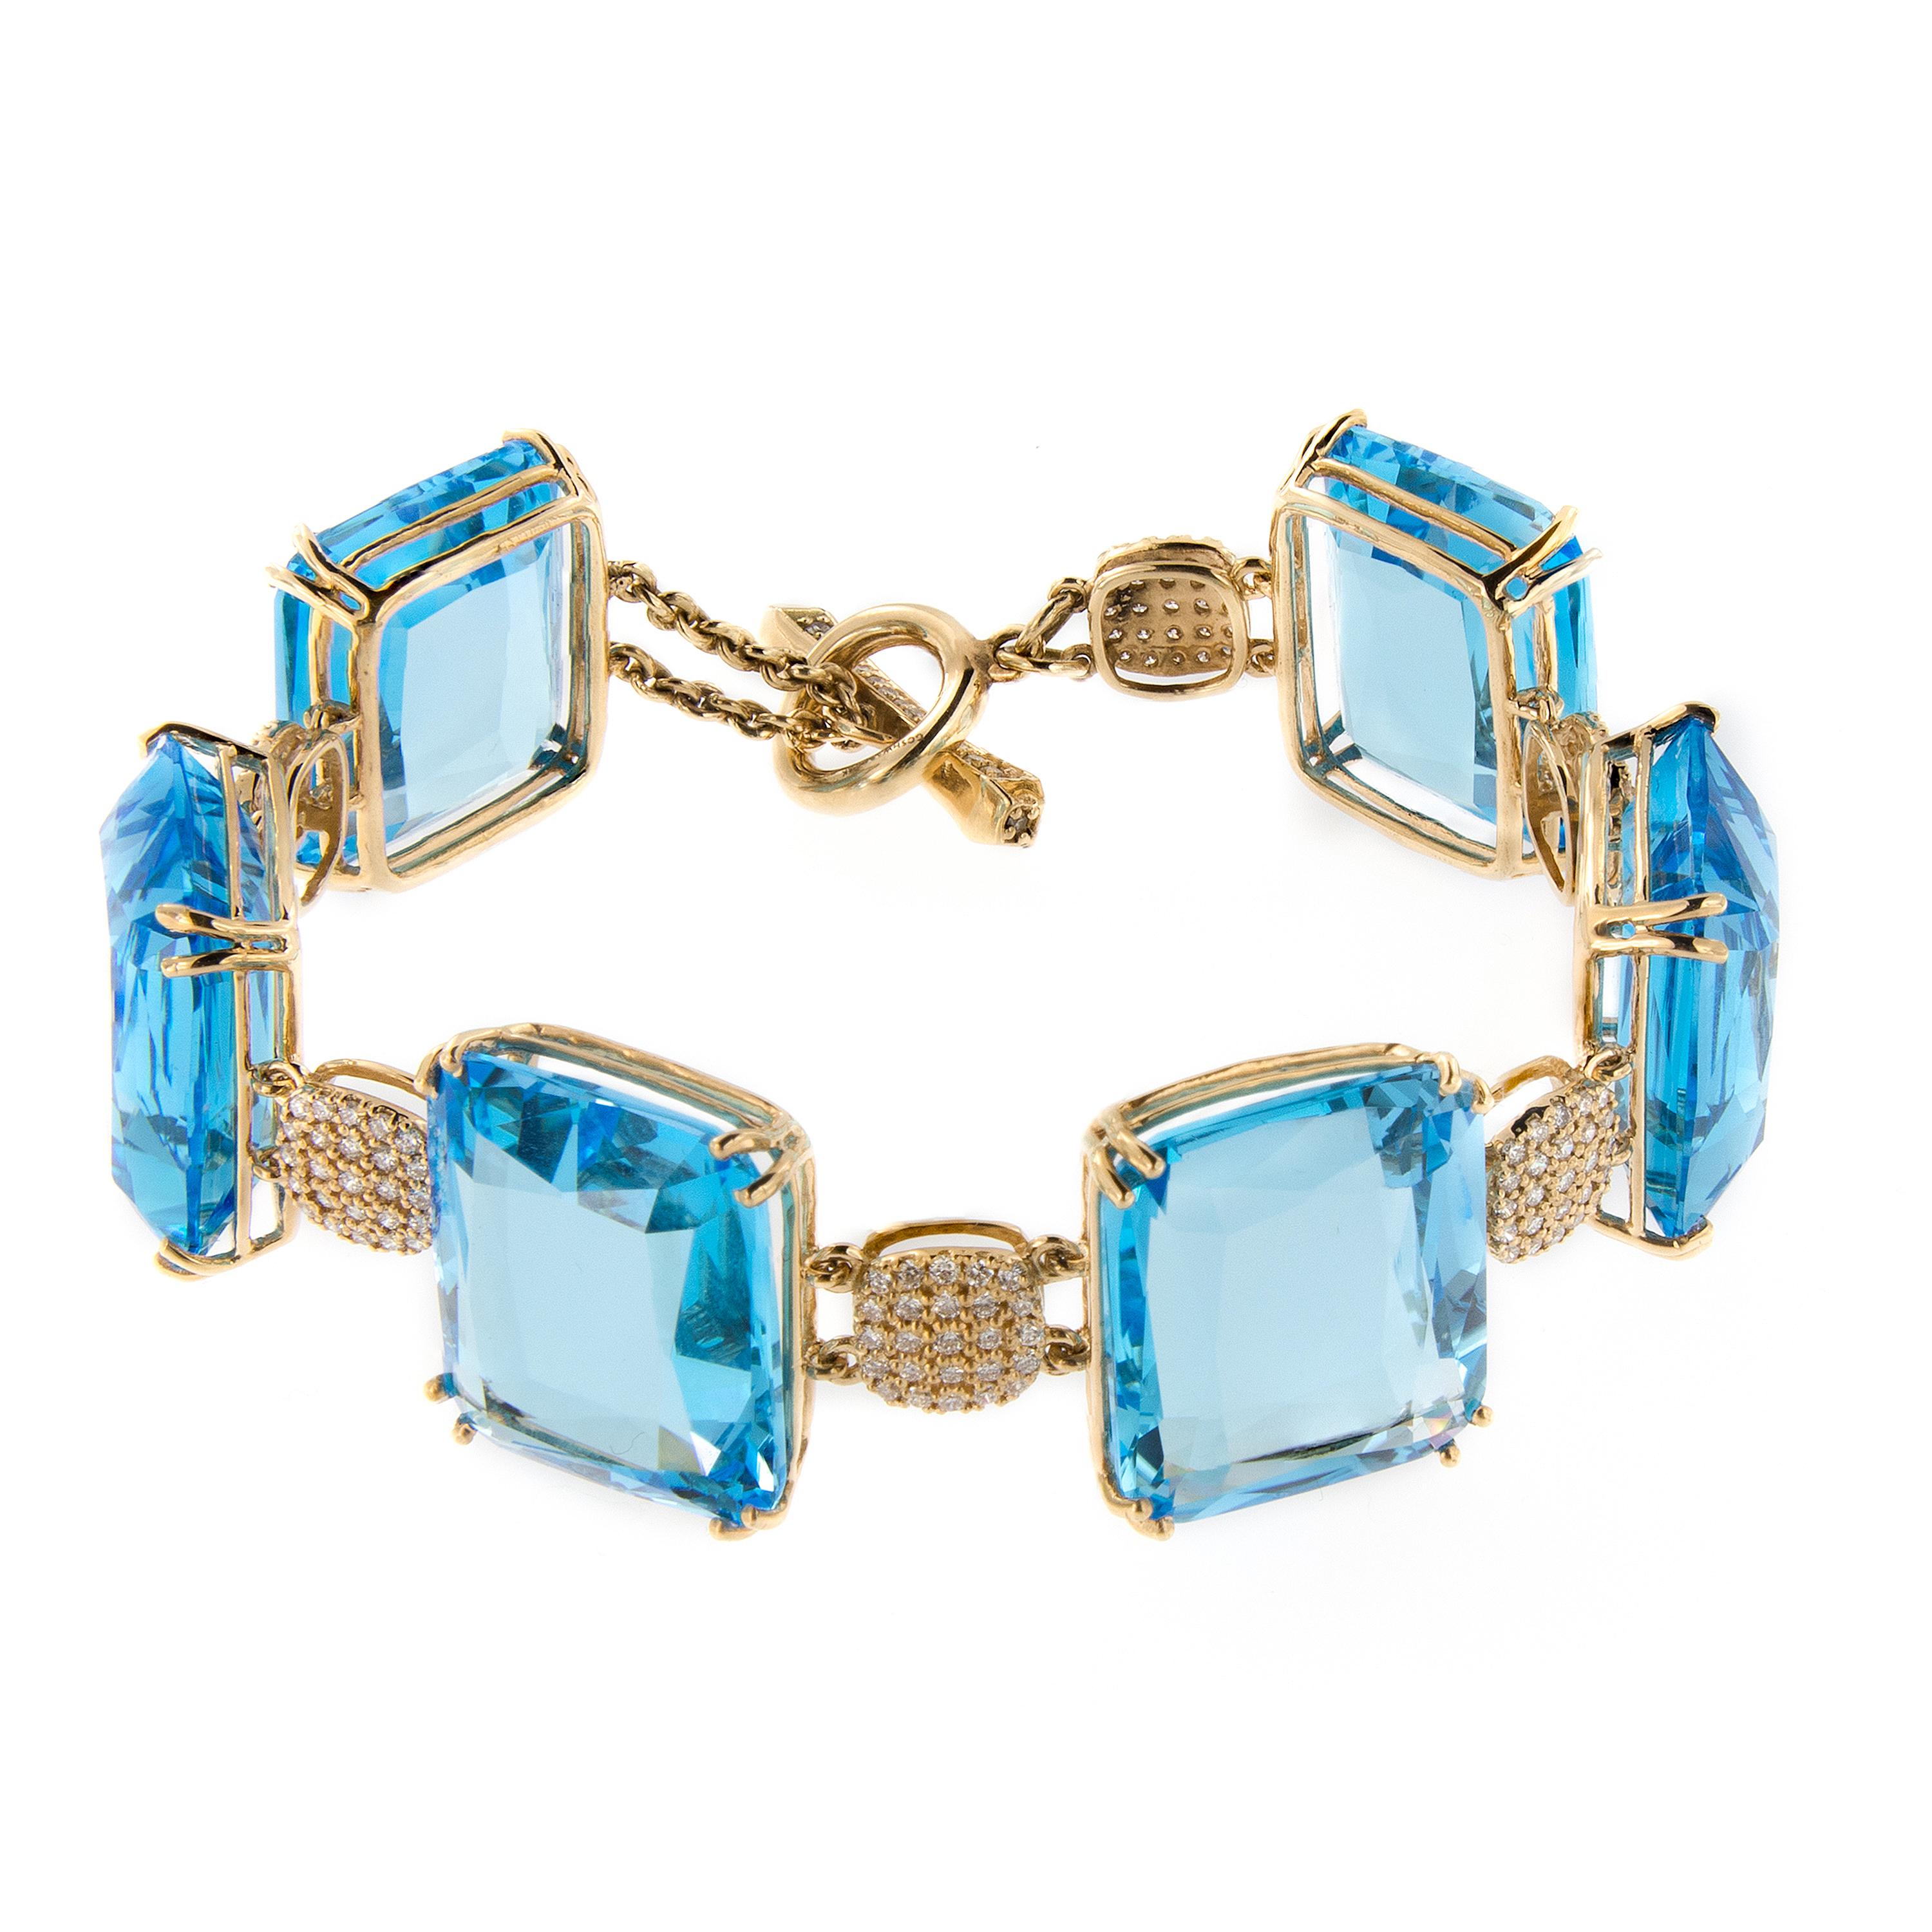 Gossip 18k yellow gold bracelet features blue topaz gems connected diamond set links. Bracelet is from the Gossip Collection designed by Goshwara of New York.  7.25 inches long. Marked Goshwara.

Blue Topaz 148.91 cttw
Diamond 1.74 cttw